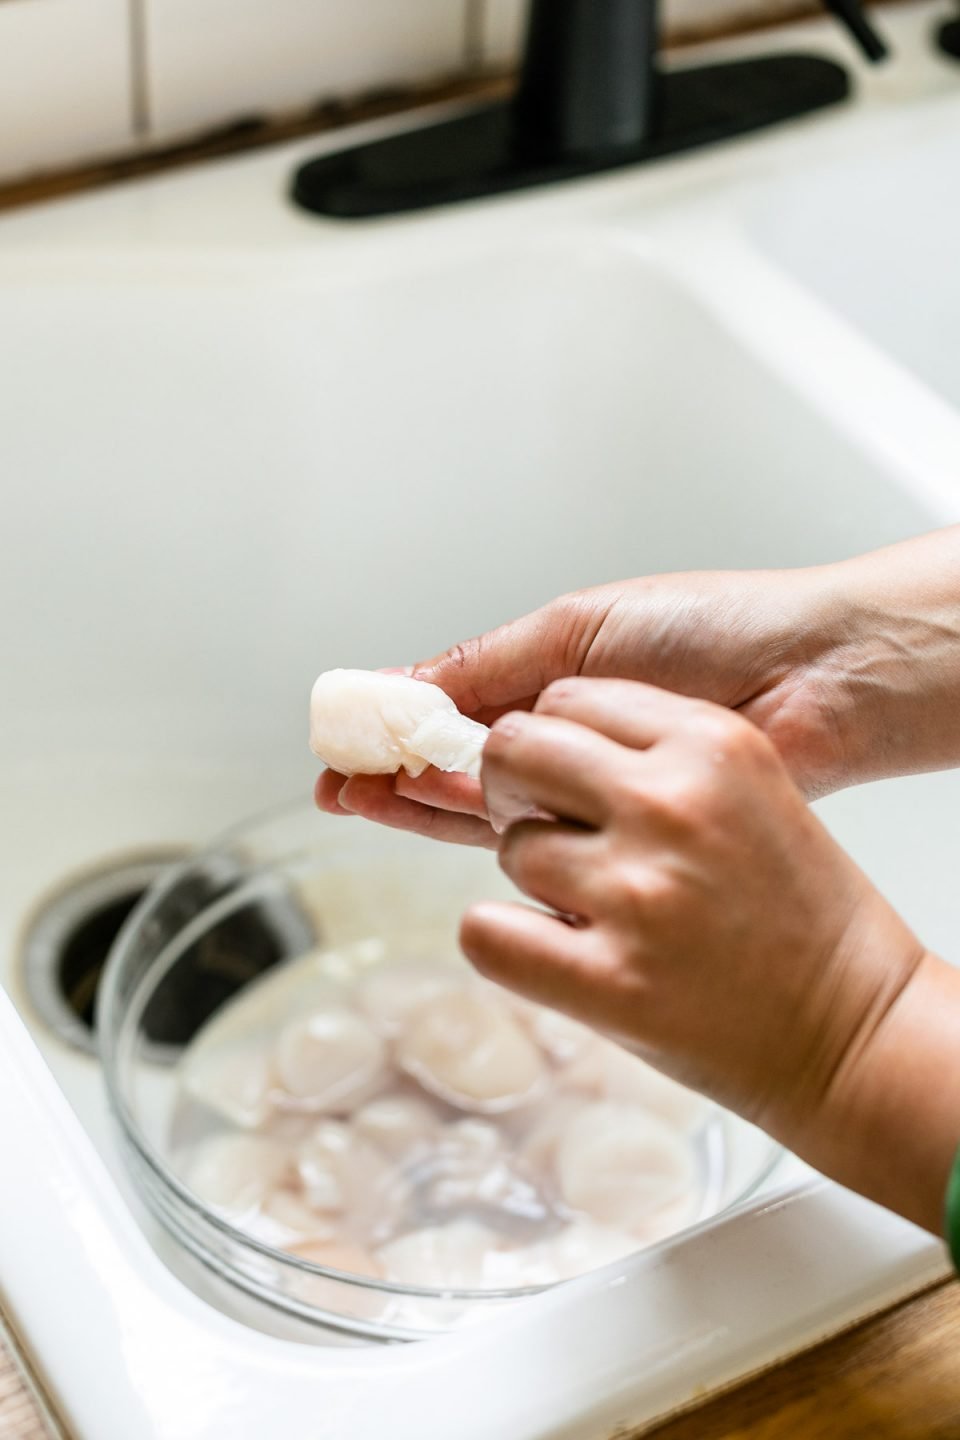 Cleaning scallops for searing – A woman's hands shown tearing the side muscle tissue away from sea scallop meat. In the background, a farmhouse-style sink with a bowl of sea scallops in it.